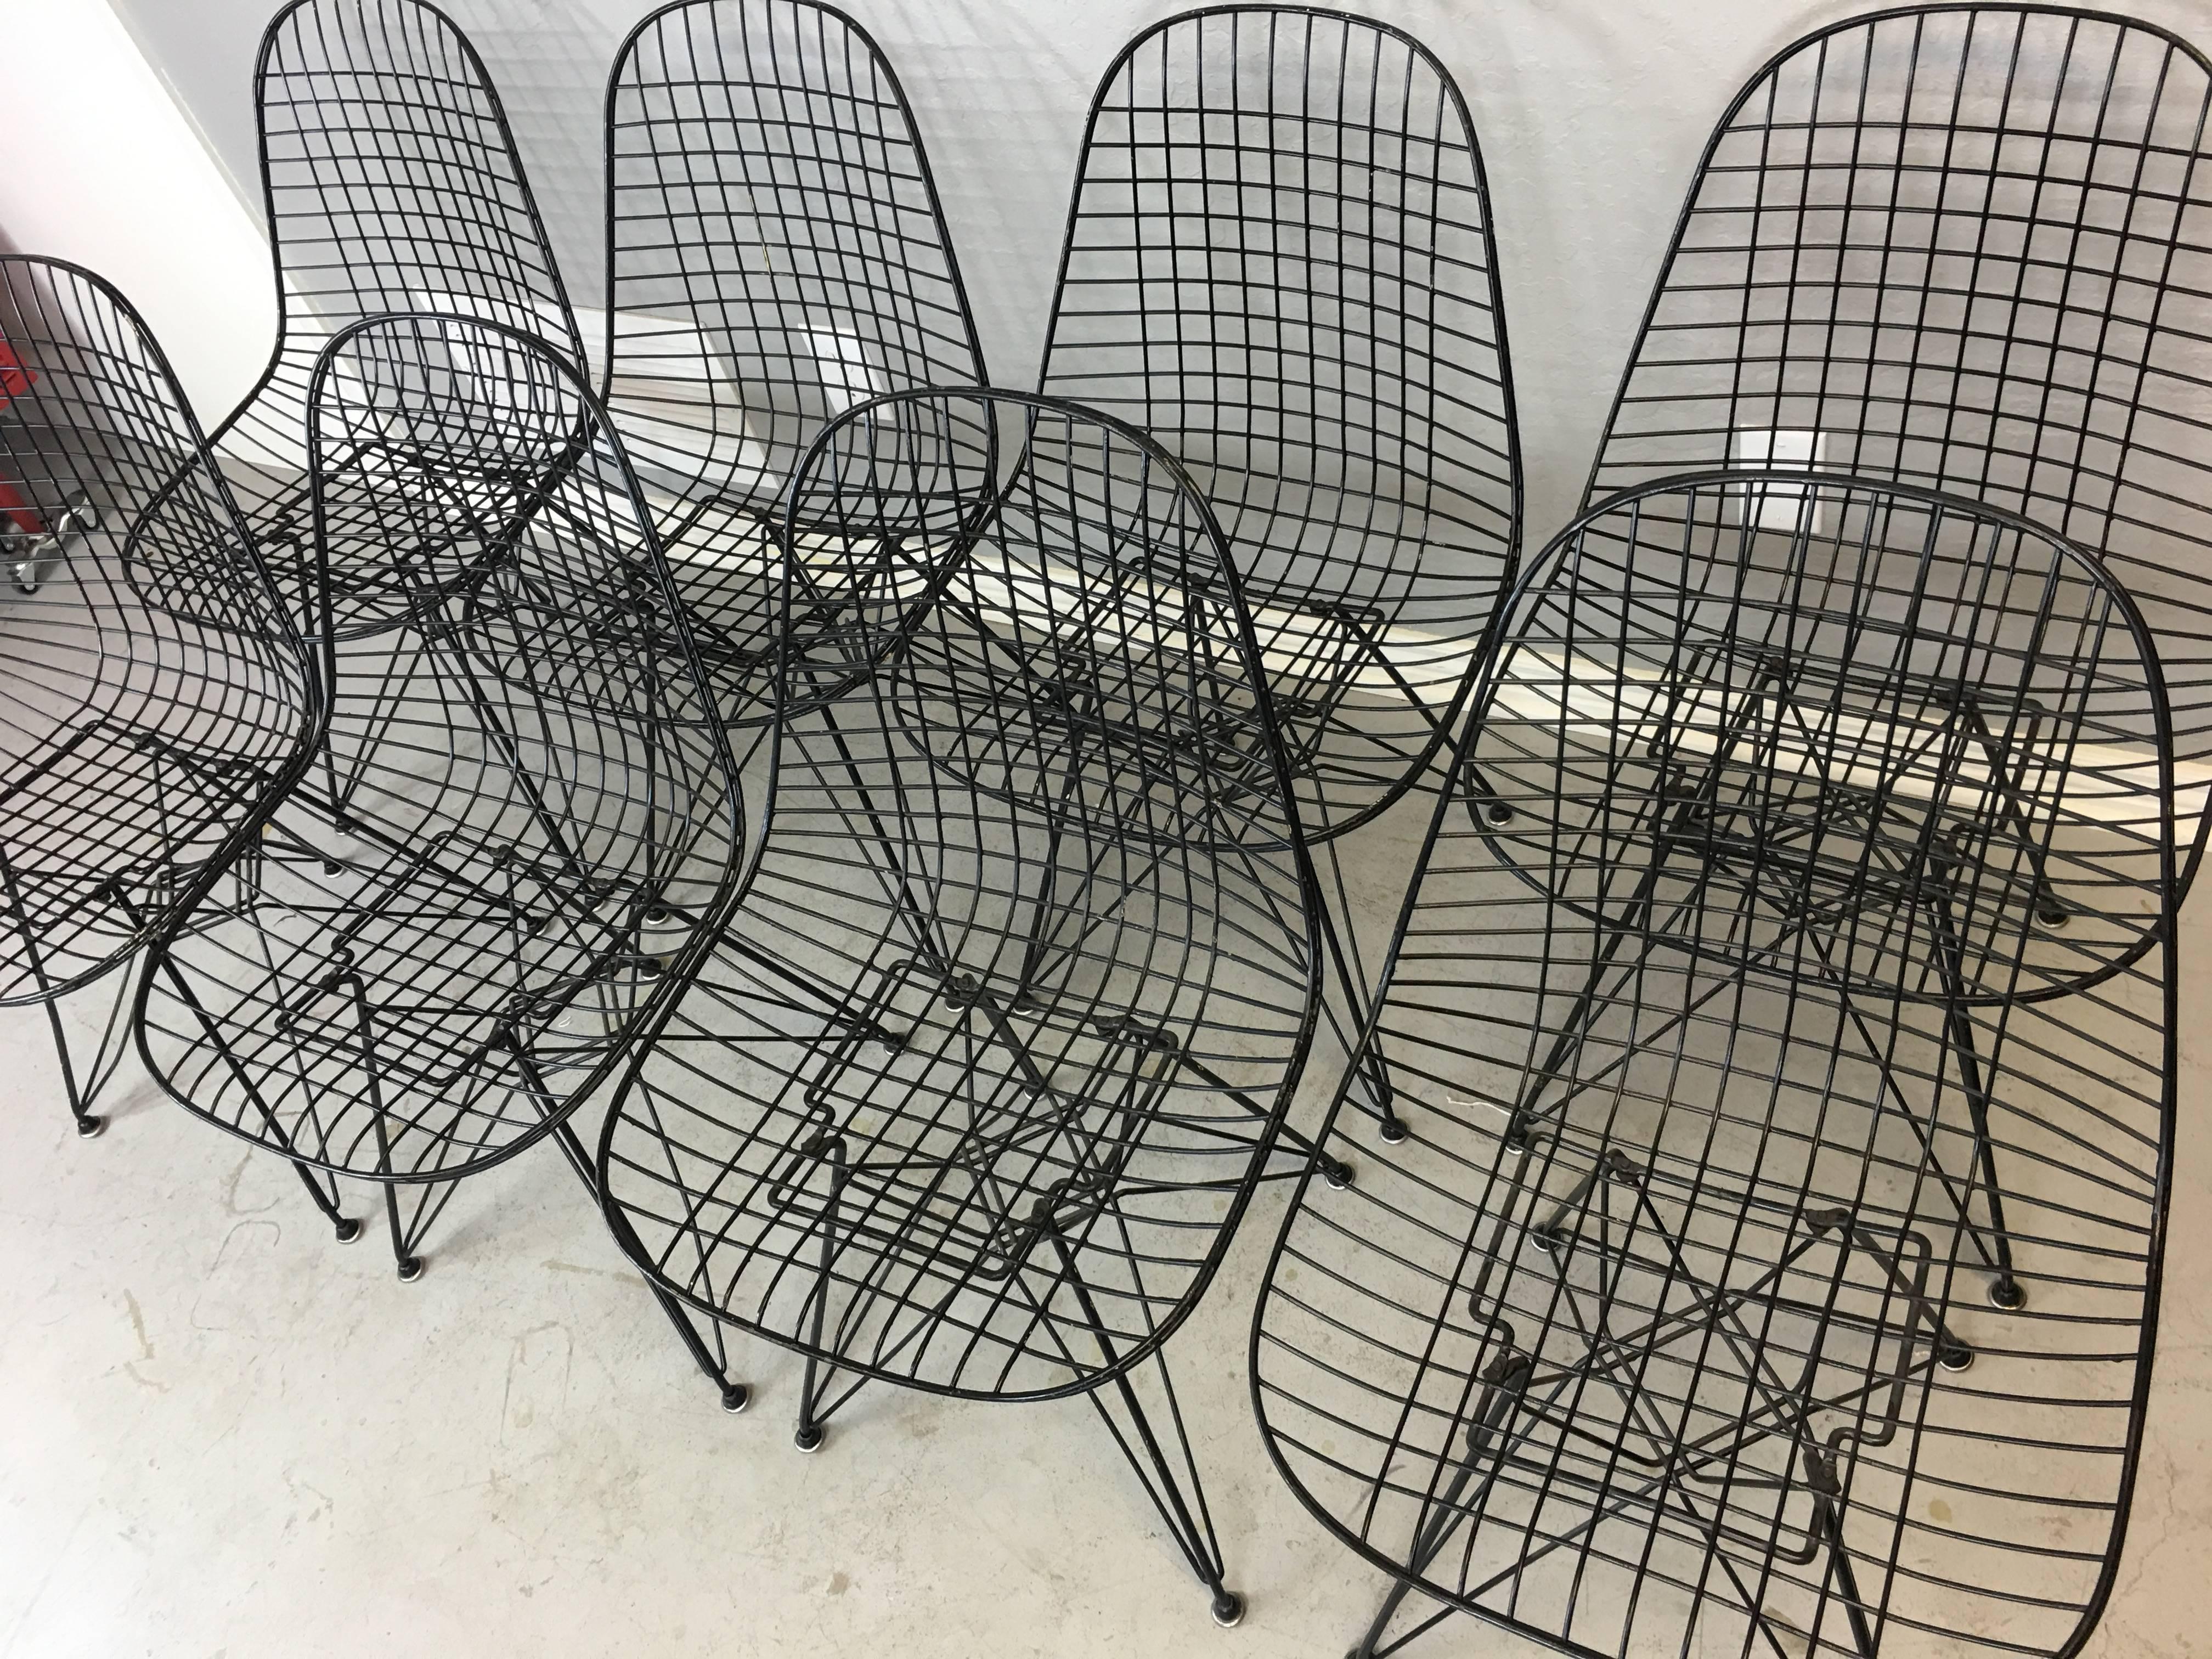 Four Charles and Ray Eames DKR.5 Eiffel base wire chairs, circa 1990. All welds are intact. Minor black paint loss. No cushions. All glides intact. May purchase these chairs in pairs. 

Price listed is per chair. 